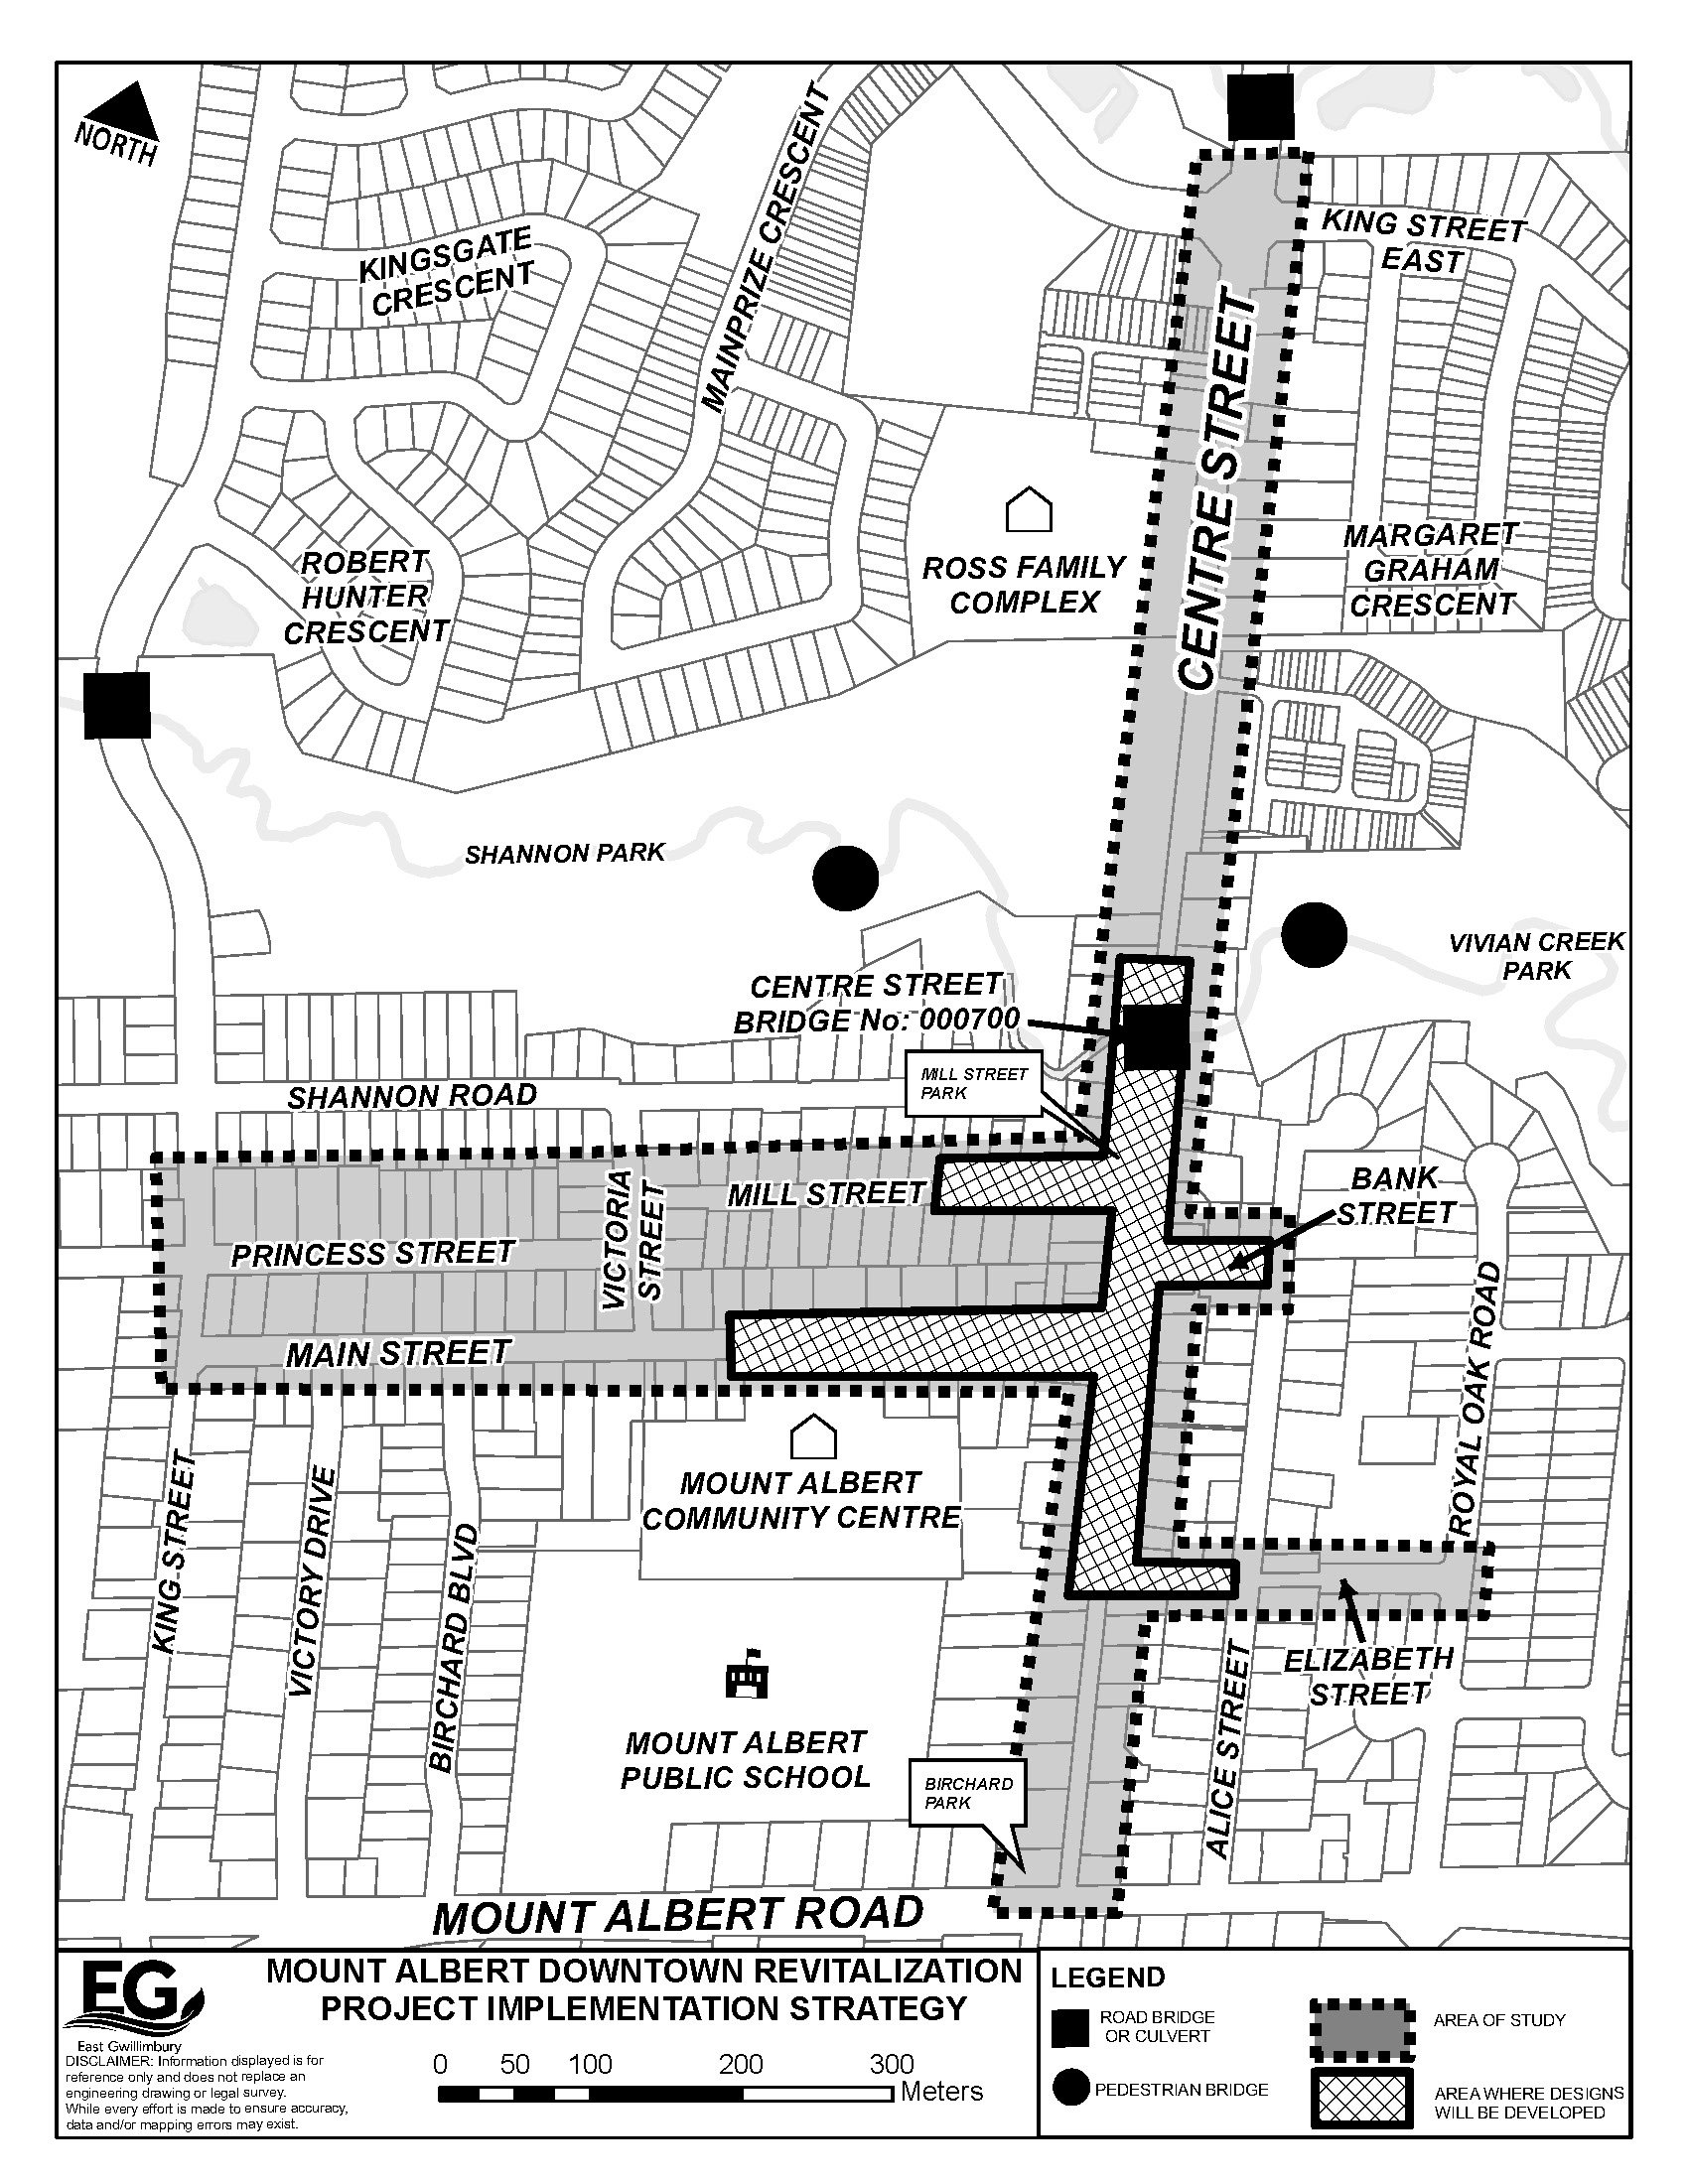 Map of Centre Street showing revitalization plans